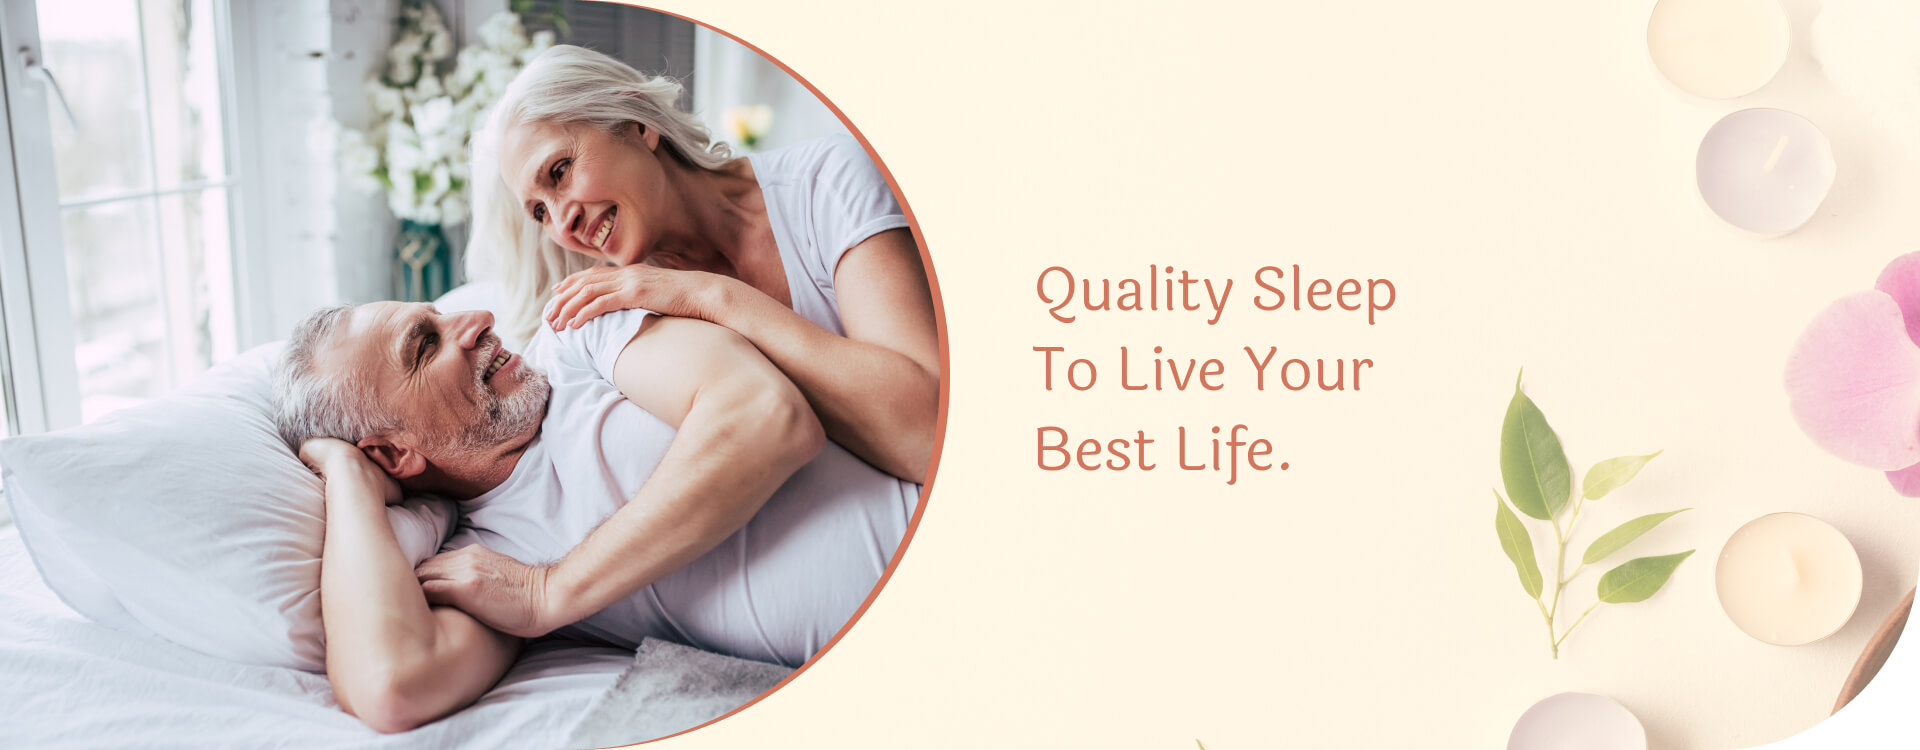 An older couple relaxing in bed - Quality Sleep to Live Your Best Life